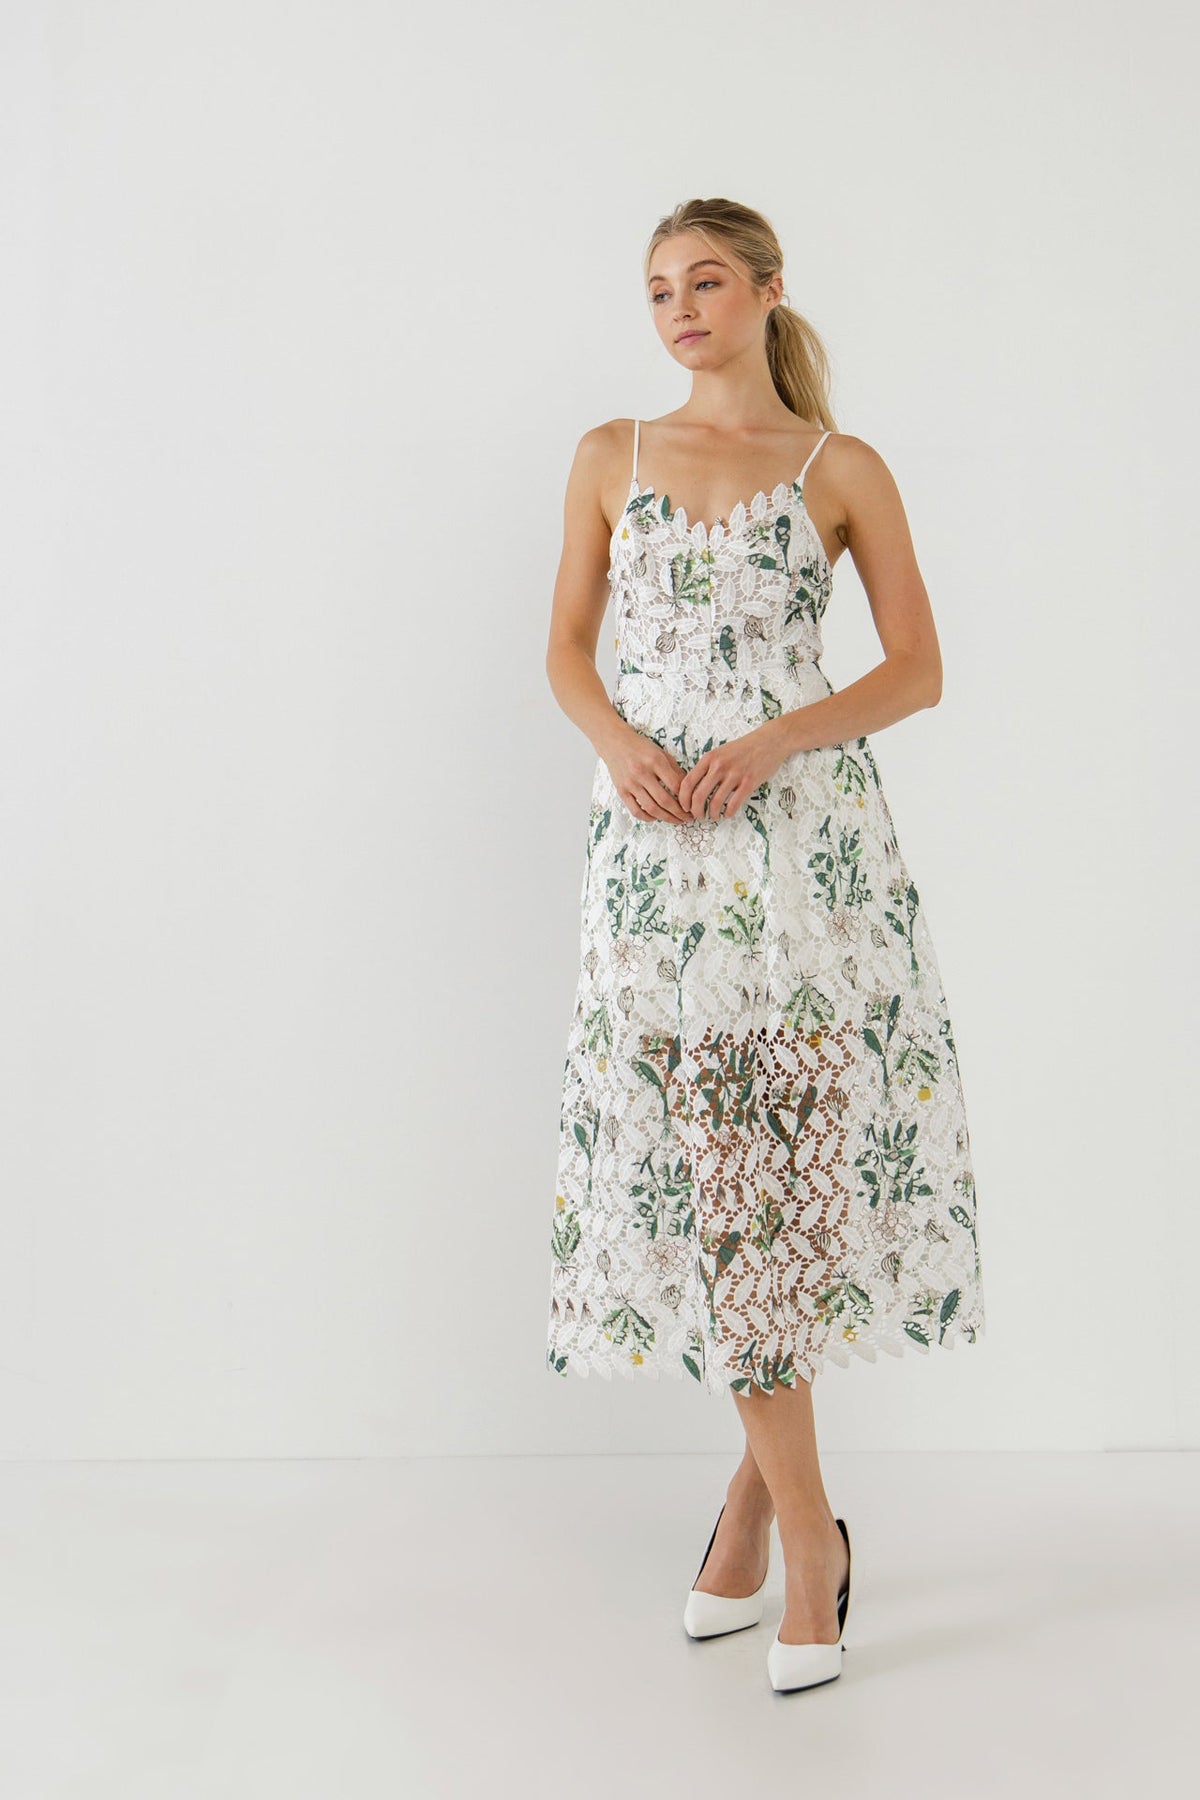 ENDLESS ROSE - Floral Printed Lace Midi Dress - DRESSES available at Objectrare